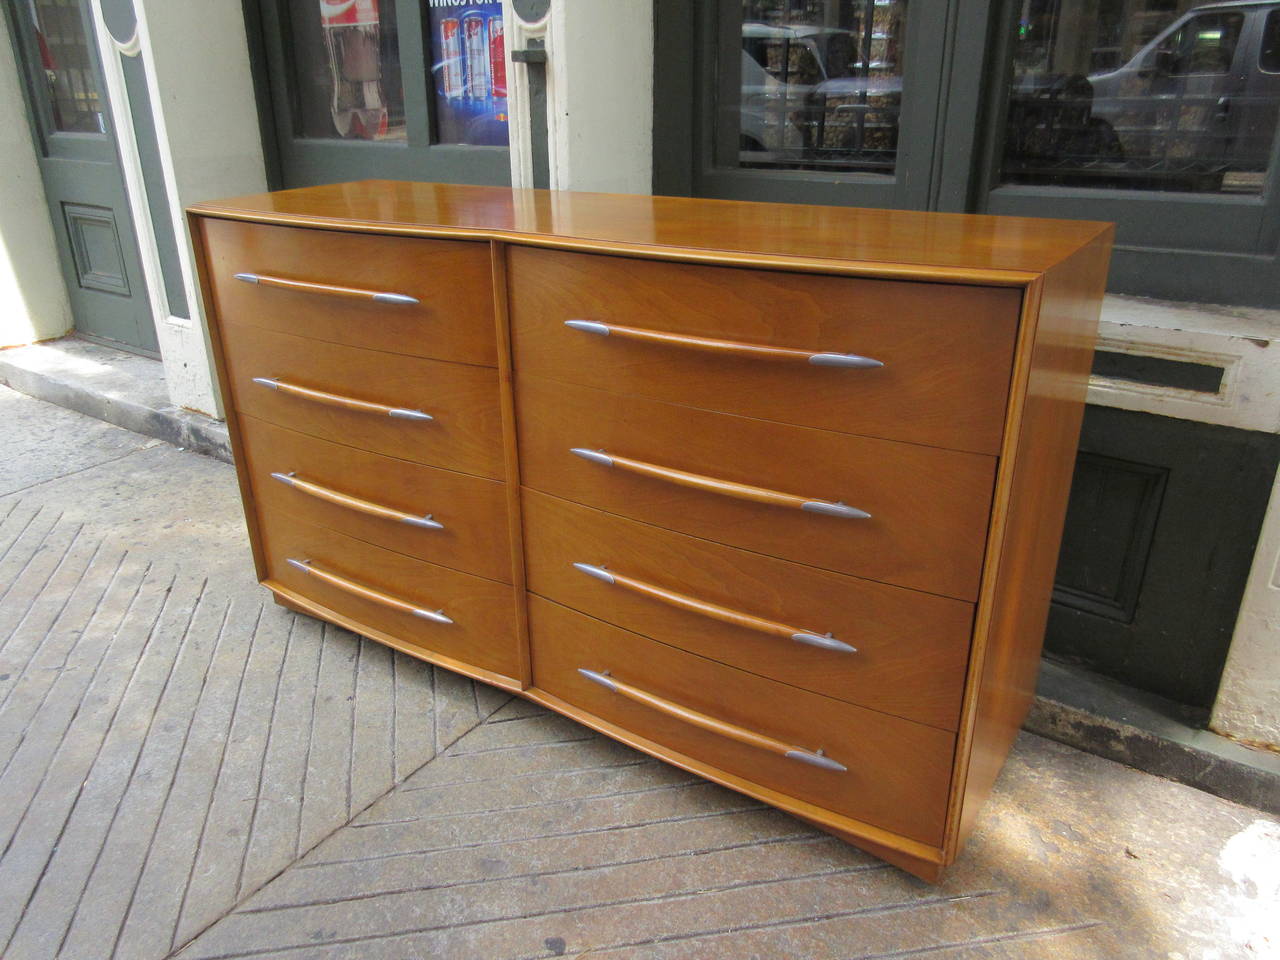 Part of a large bedroom set which is also available this chest has a double bank of four drawers made of a gently bowed plywood with a honey walnut veneer and solid walnut pulls capped in a metal holder. Set bought from original family and dated